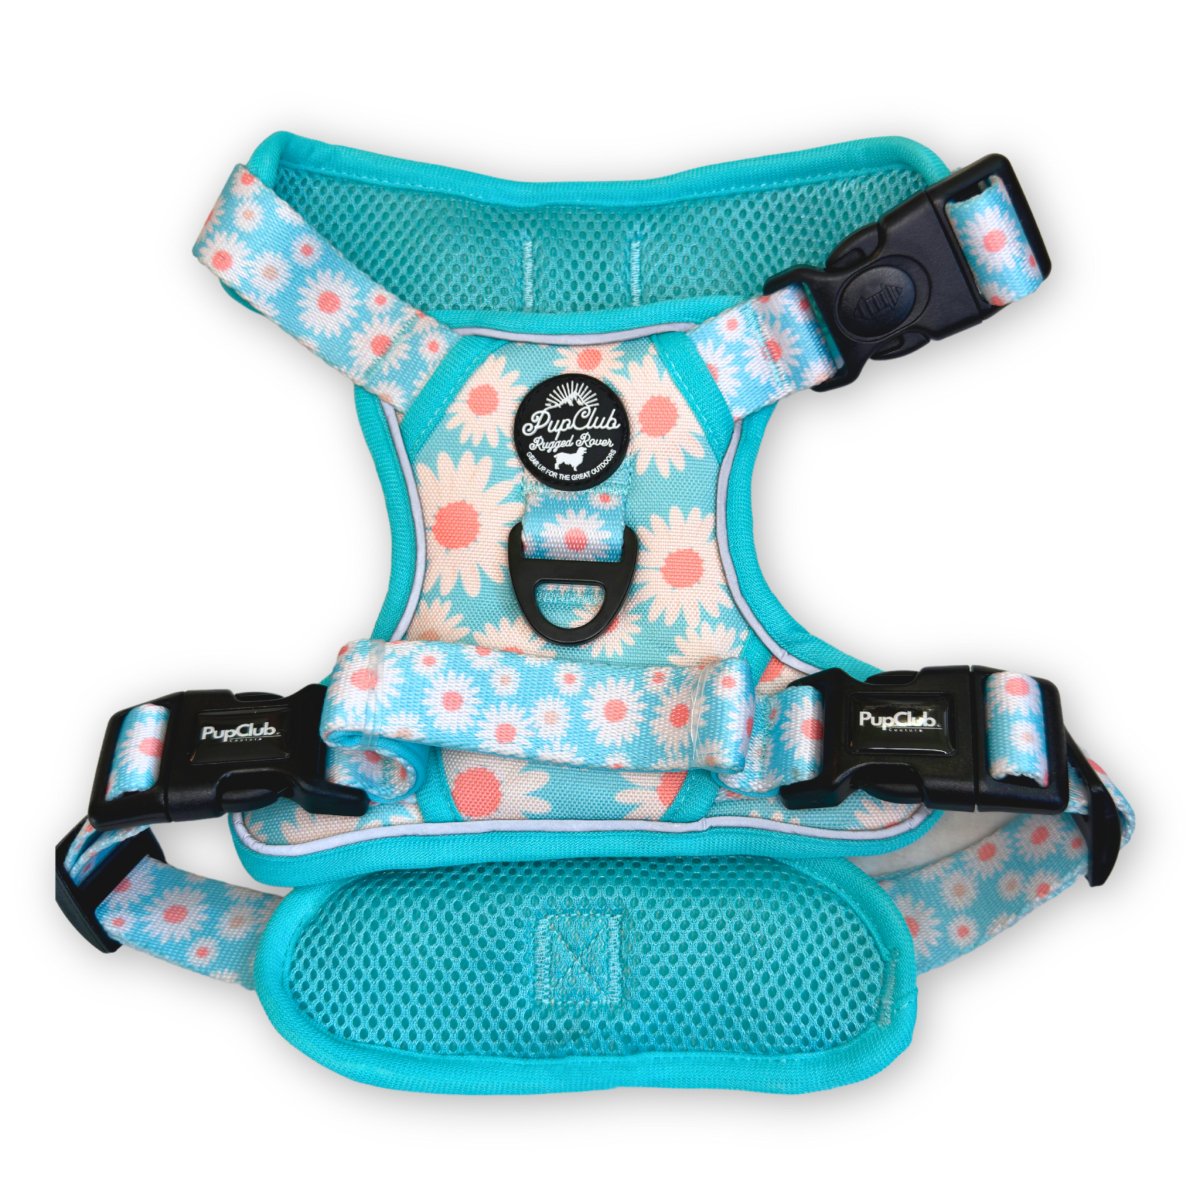 Rugged Rover Harness - Pastel Daisy back